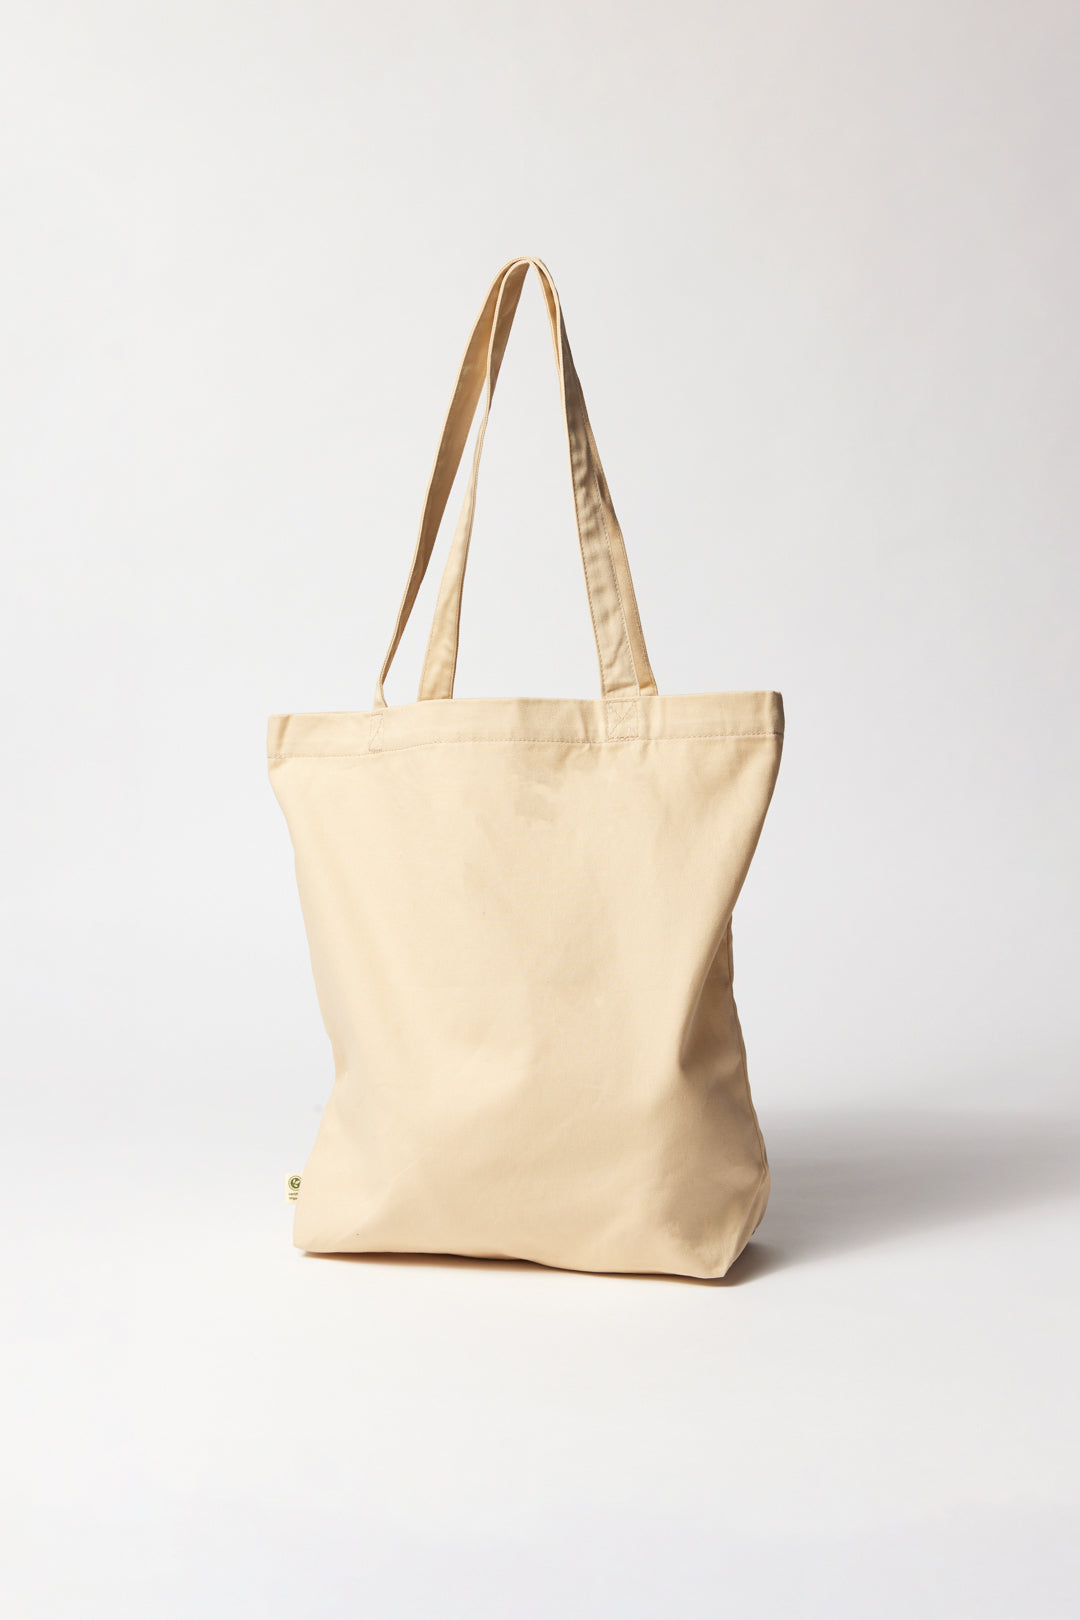 The Combahee River Collective Tote